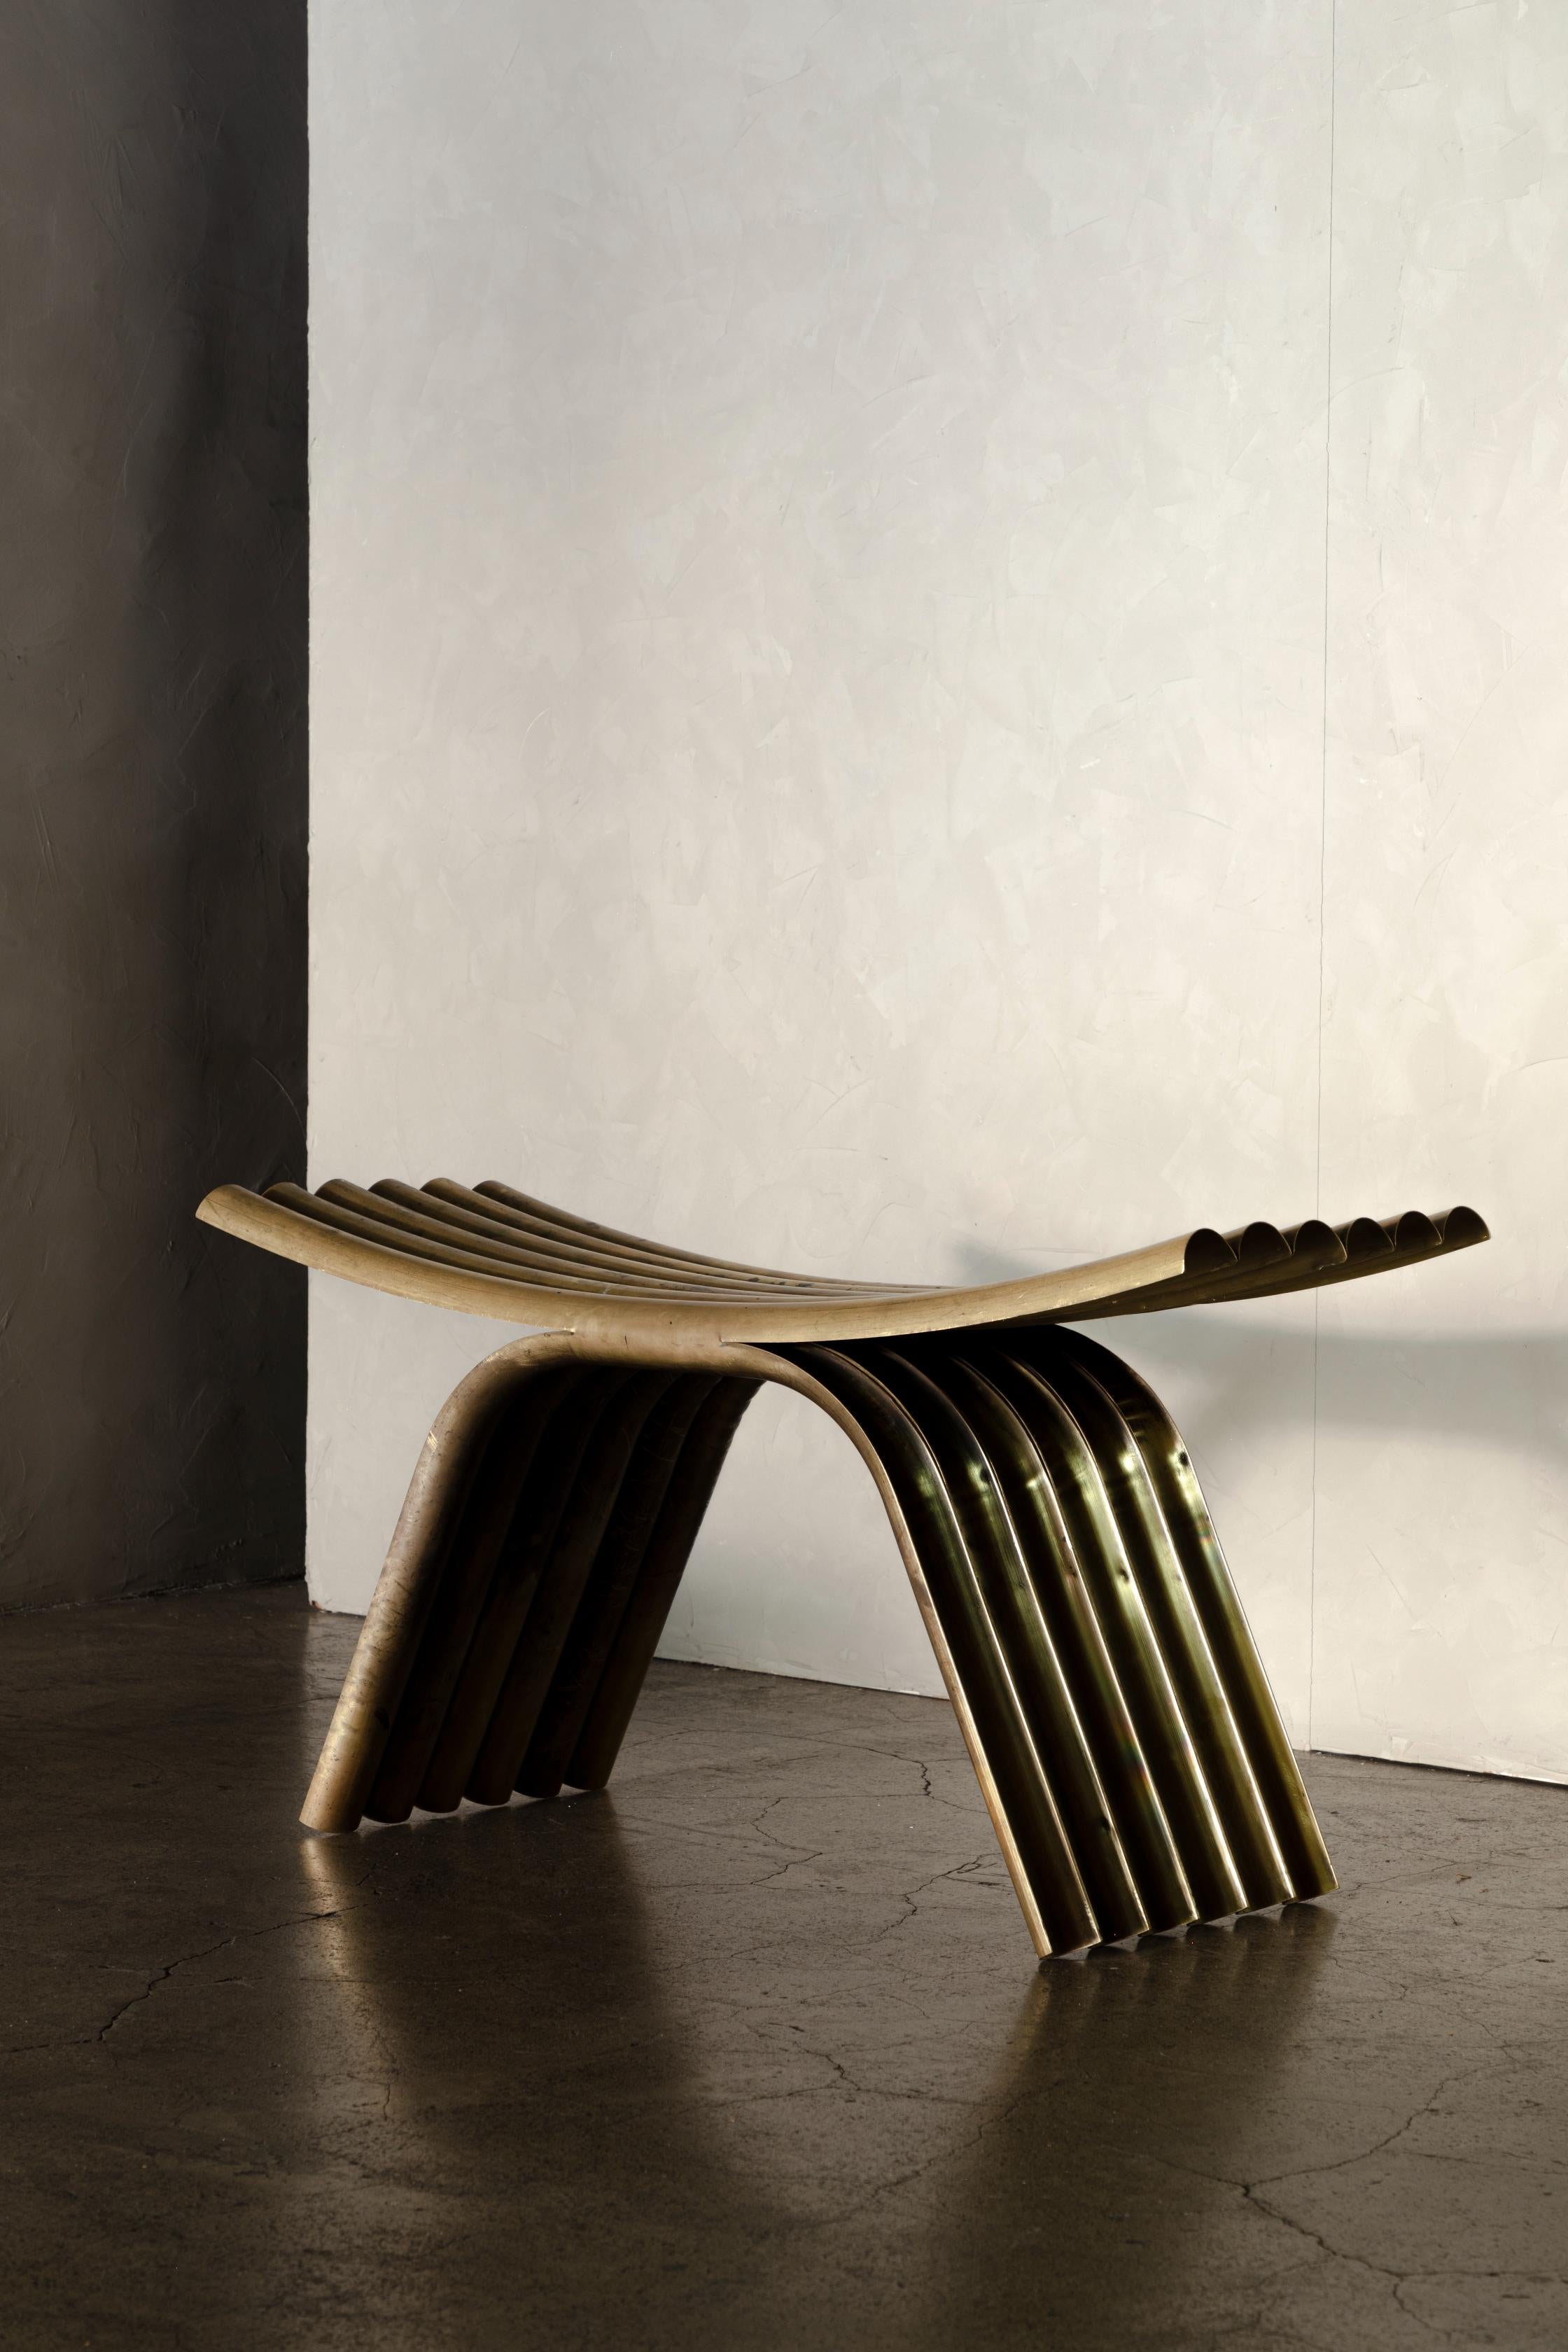 OBJ-02 stool by Manu Bano
Dimensions: W 90 x D 35 x H 45 cm
Material: Brass.

MANU BAÑÓ WAS BORN IN VALENCIA, SPAIN IN 1990. AFTER STUDYING Industrial Design AT UCH CEU UNIVERSITY IN VALENCIA AND A MASTER’S DEGREE IN FURNITURE AND LIGHTING, HE